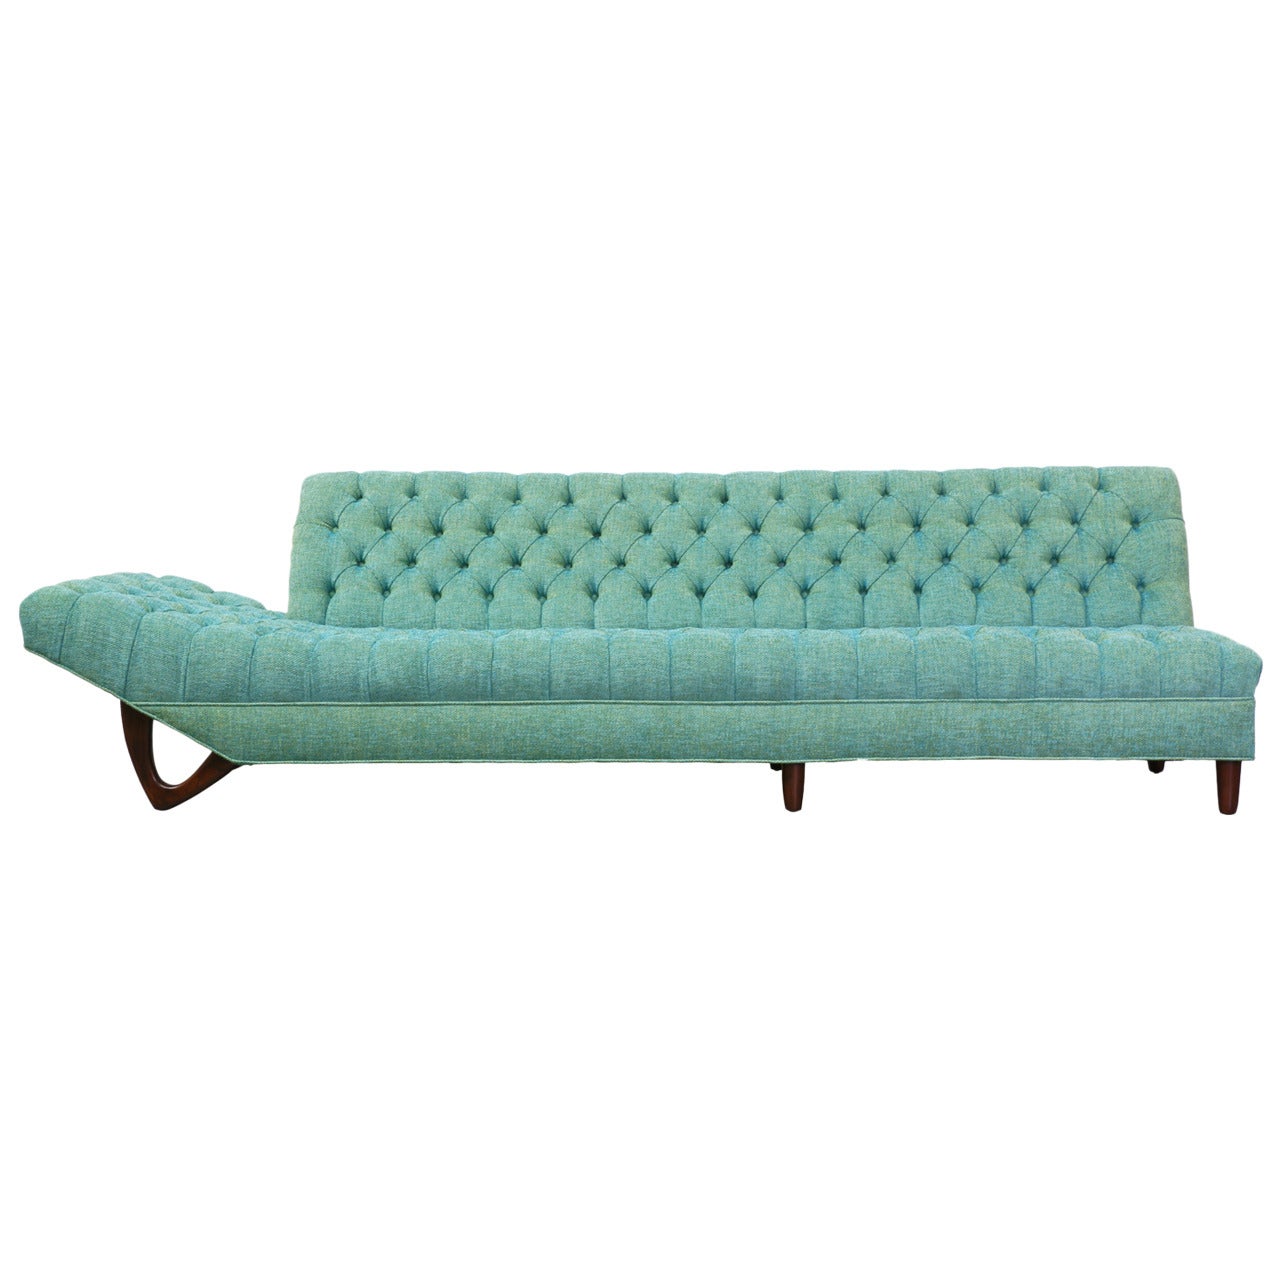 Craft Associates Style Tufted Sofa or Chaise Lounge